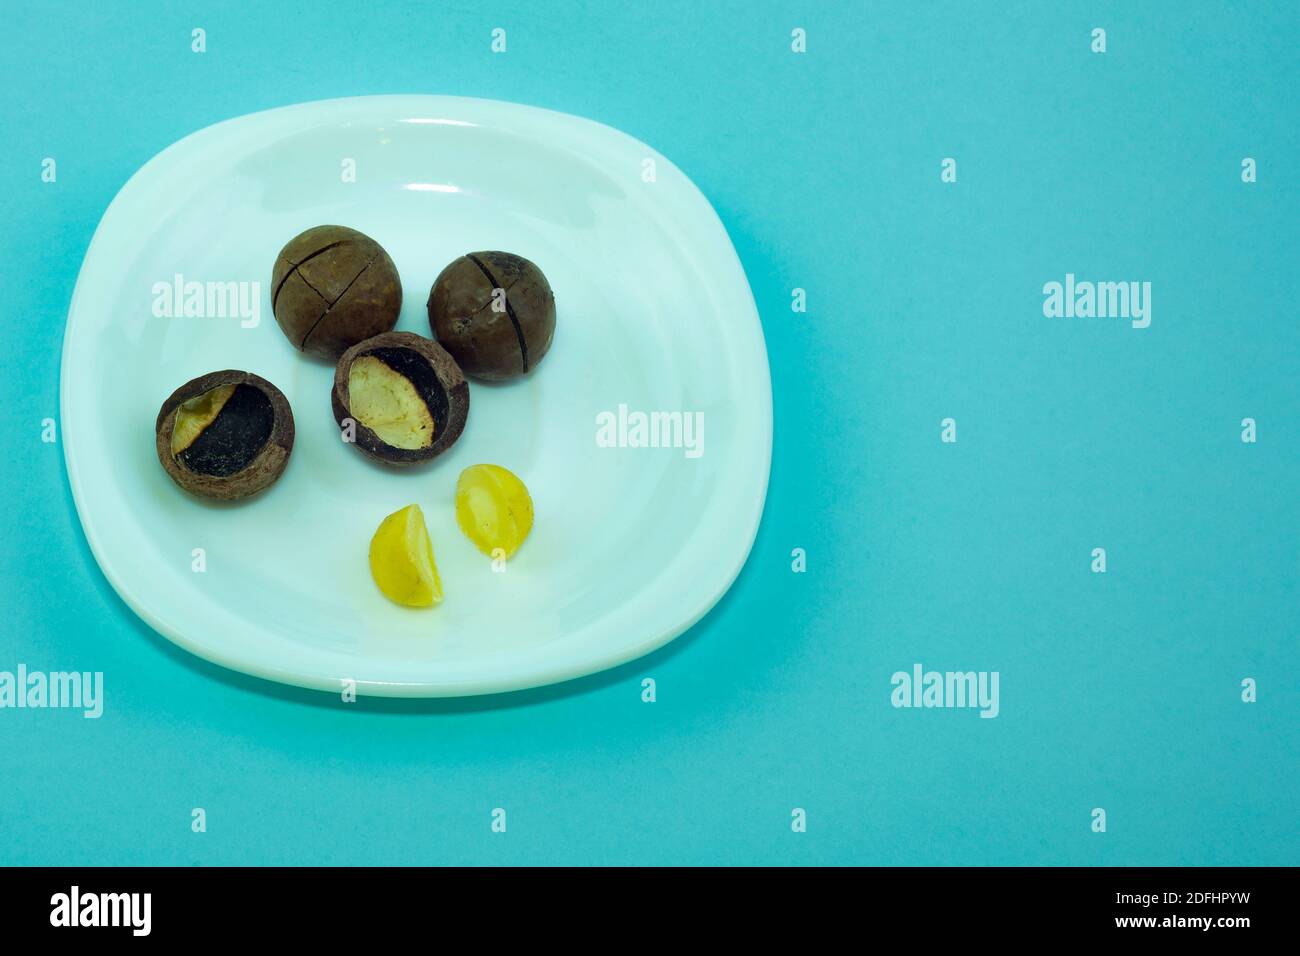 Macadam nuts on a white plate. White plate isolated on a blue background. Closed and open nuts. Stock Photo